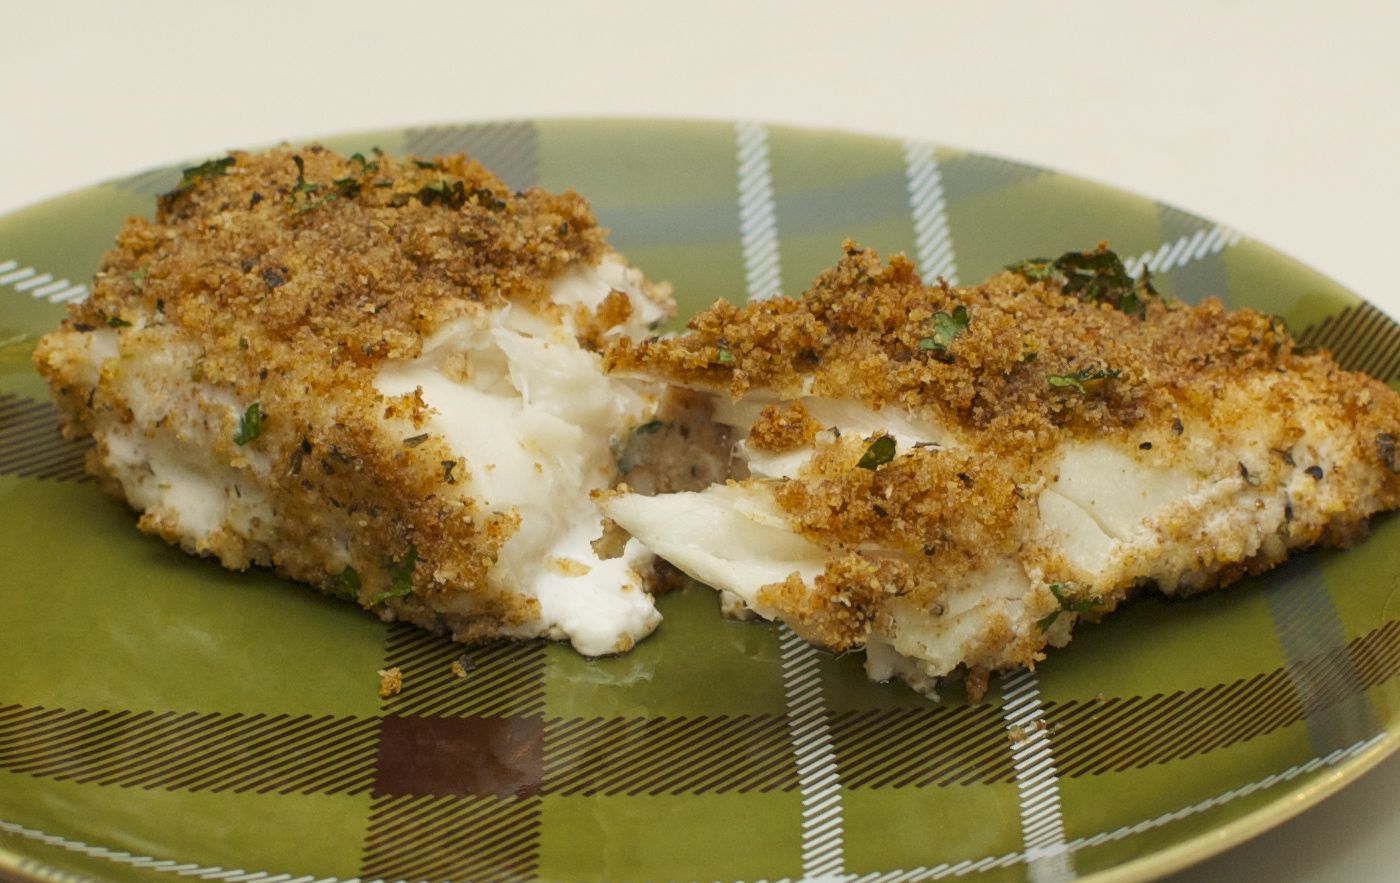 Baked Halibut with Bread Crumbs and Italian Seasoning